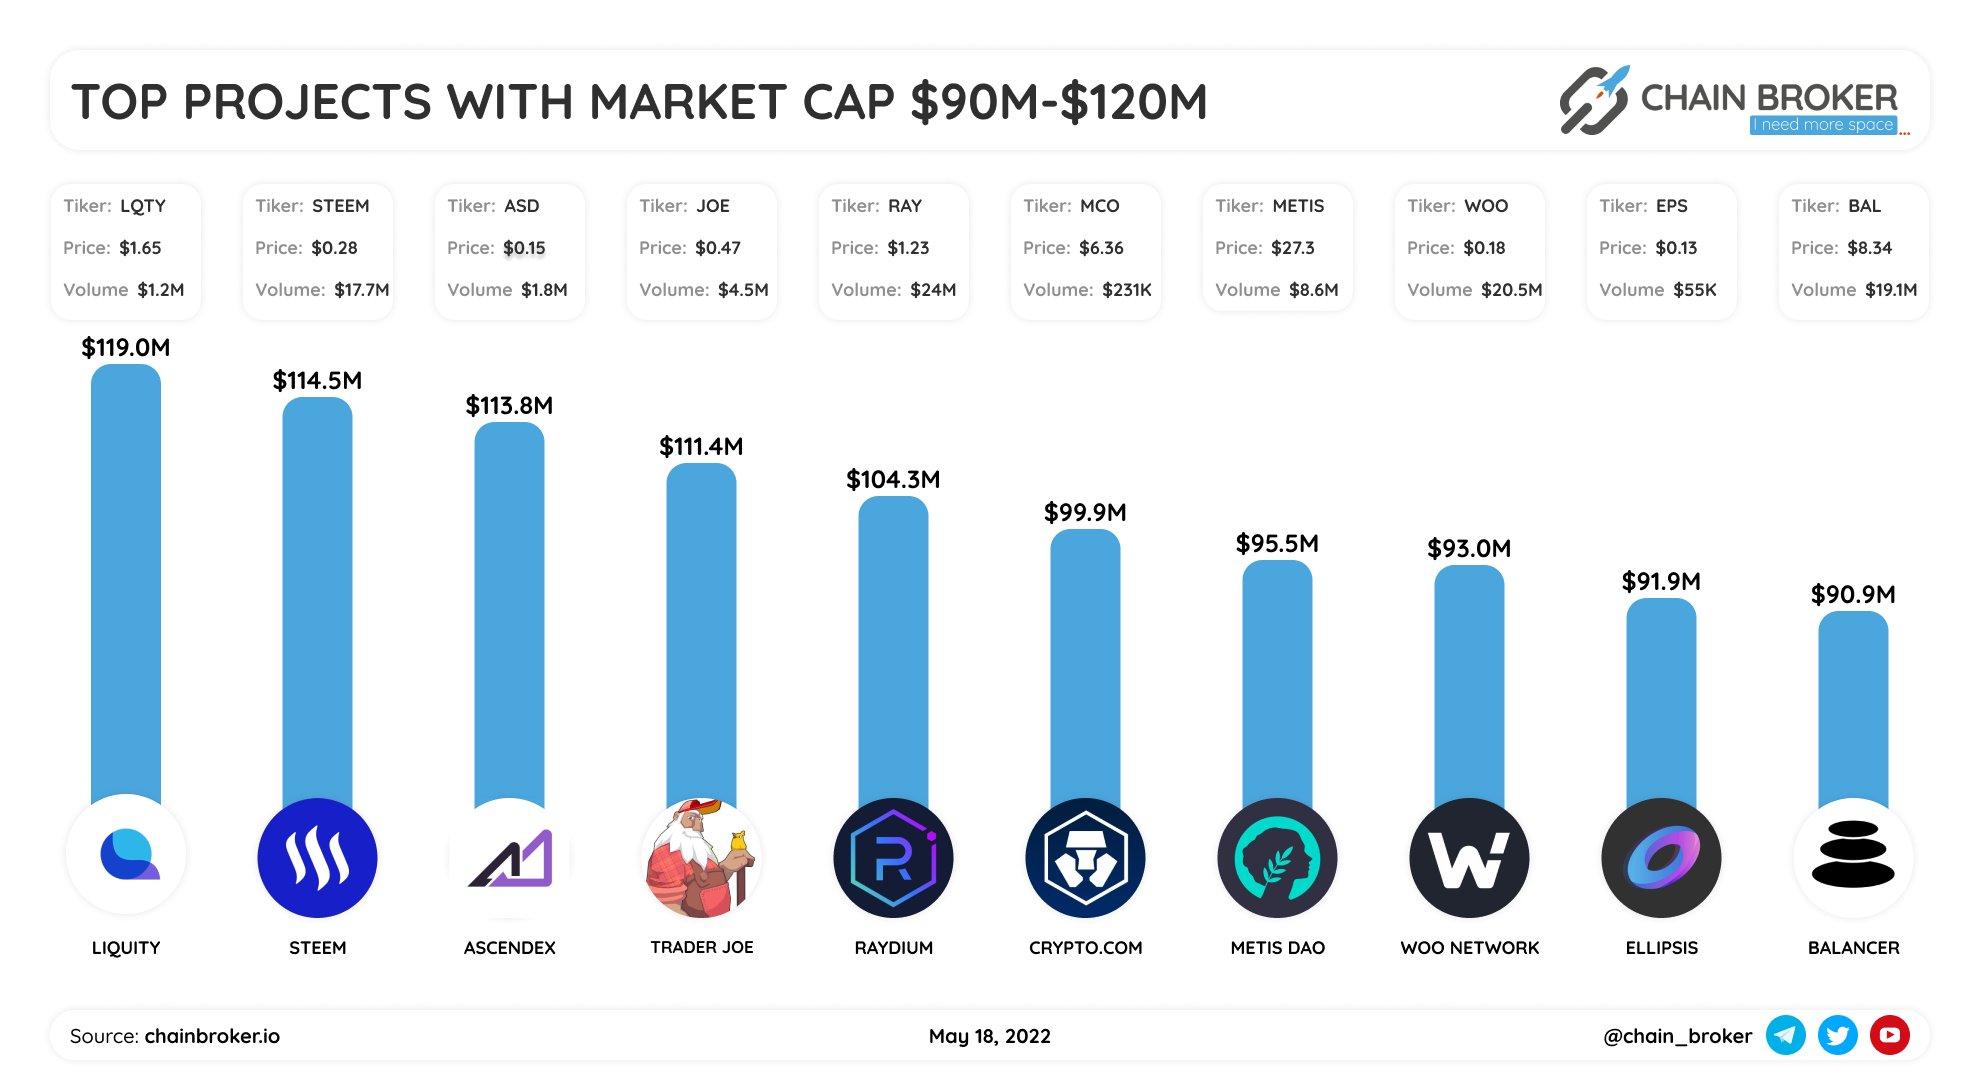 Top projects with Market Cap $90M - $120M